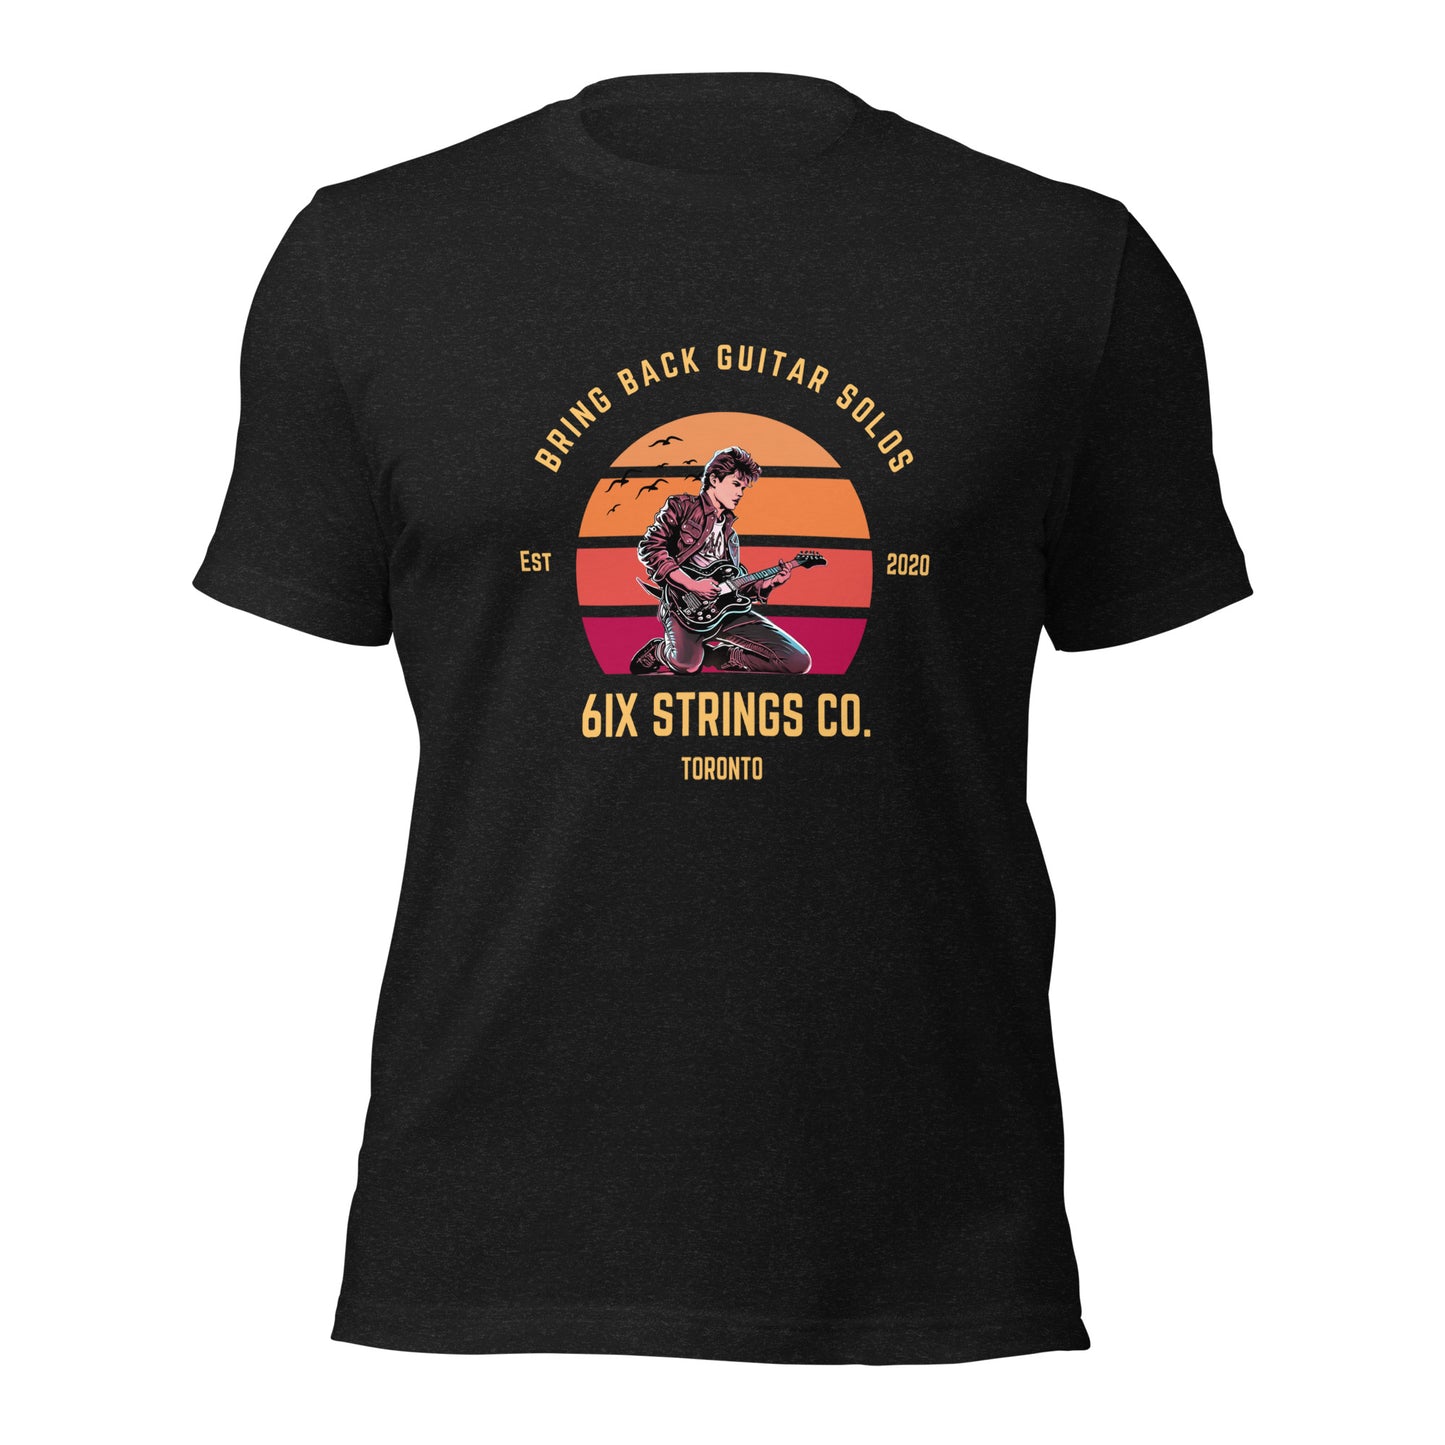 Sunset Solo Tee - 'Bring Back Guitar Solos'